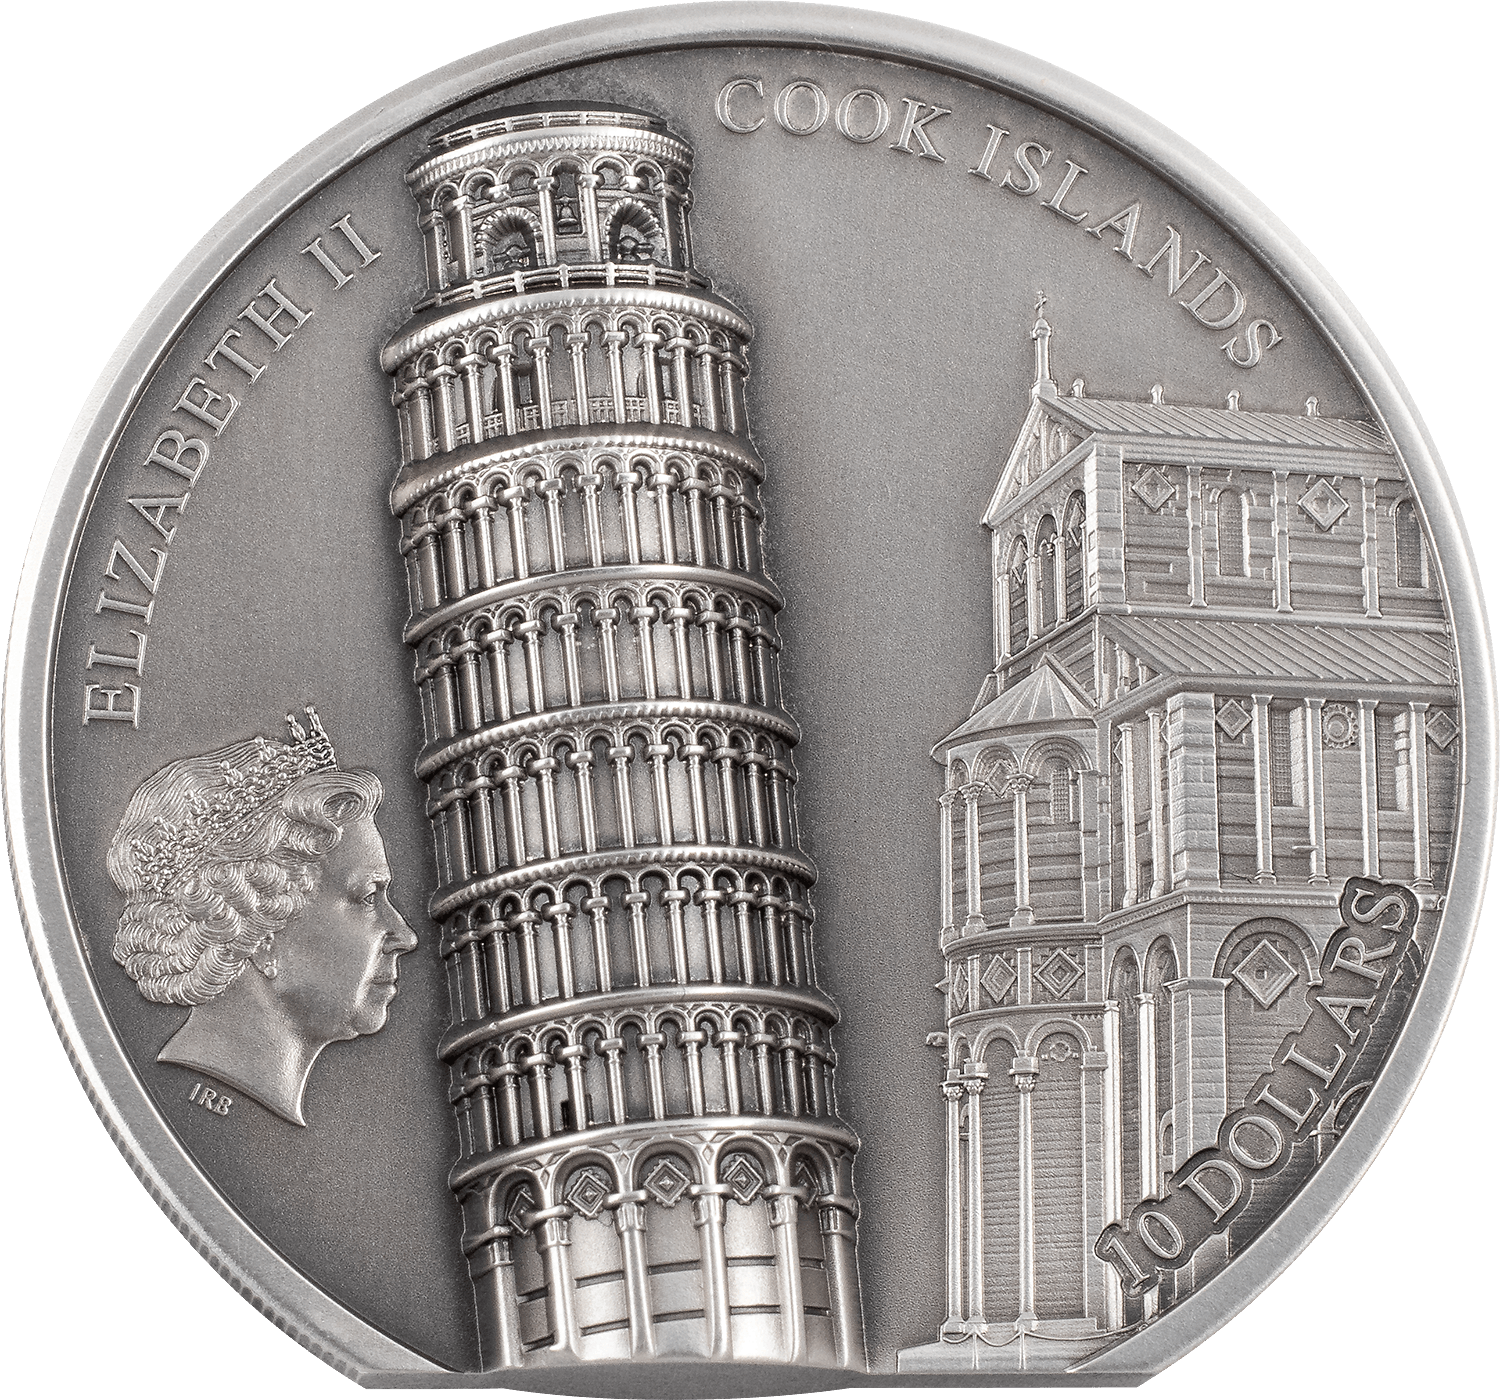 LEANING TOWER OF PISA 2 Oz Silver Coin $10 Cook Islands 2022 - PARTHAVA COIN